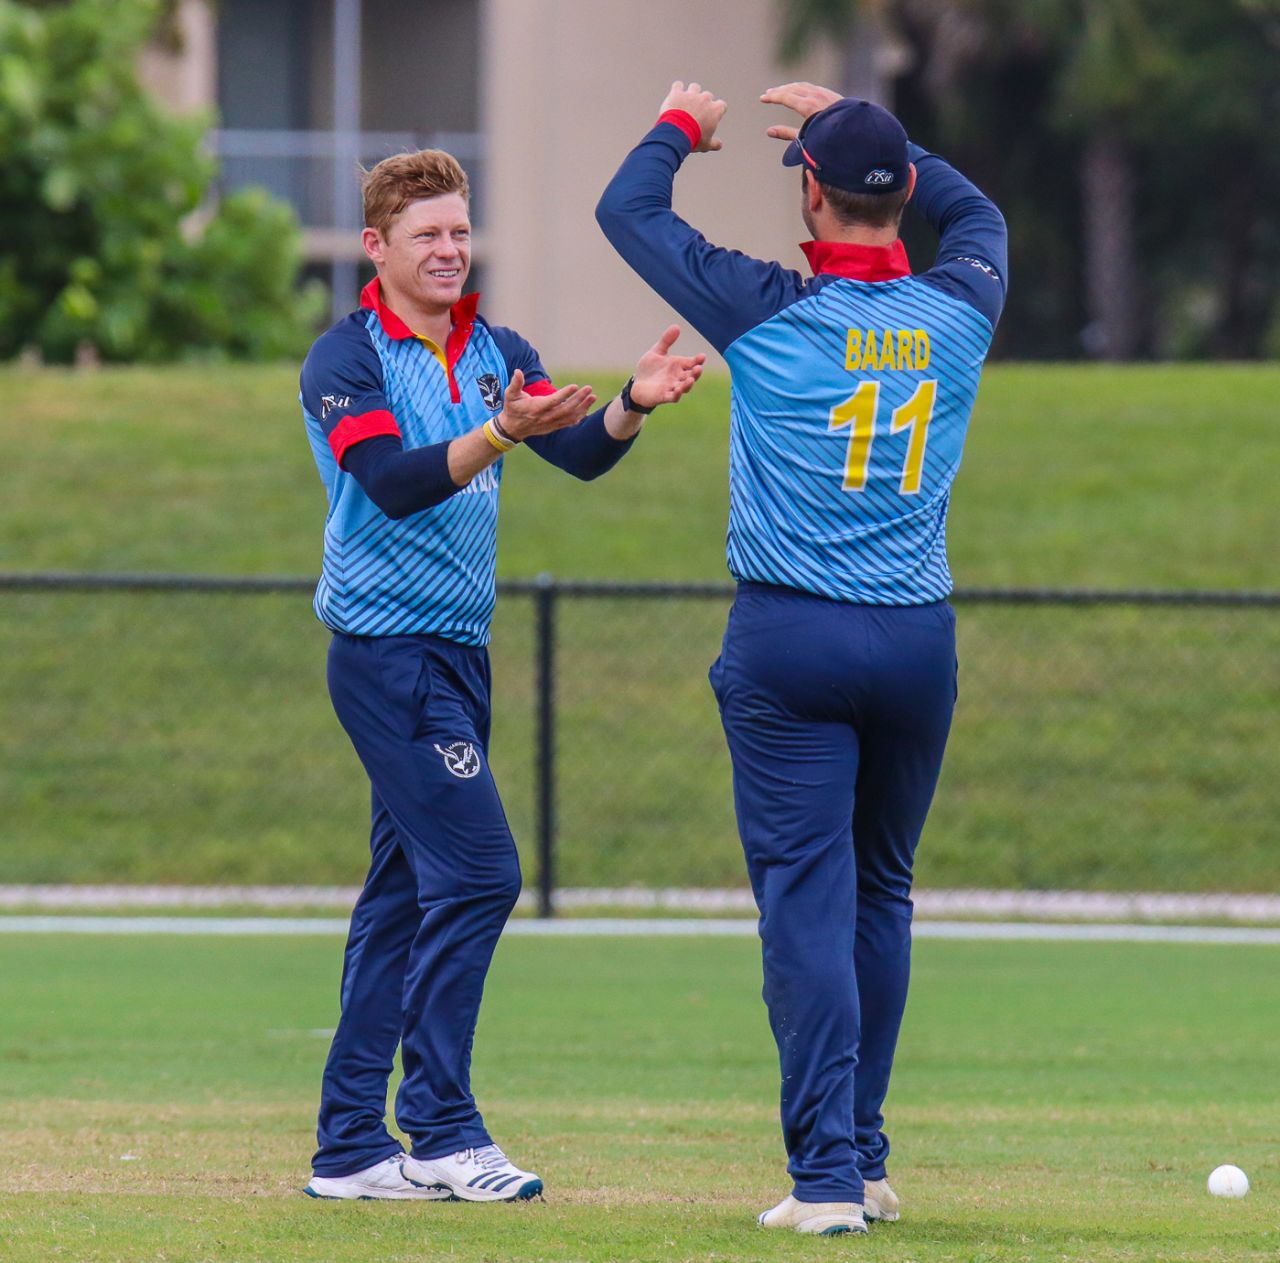 Bernard Scholtz gets congratulated after taking another wicket, Namibia v Papua New Guinea, Cricket World Cup League Two Tri-Series, Lauderhill, September 22, 2019